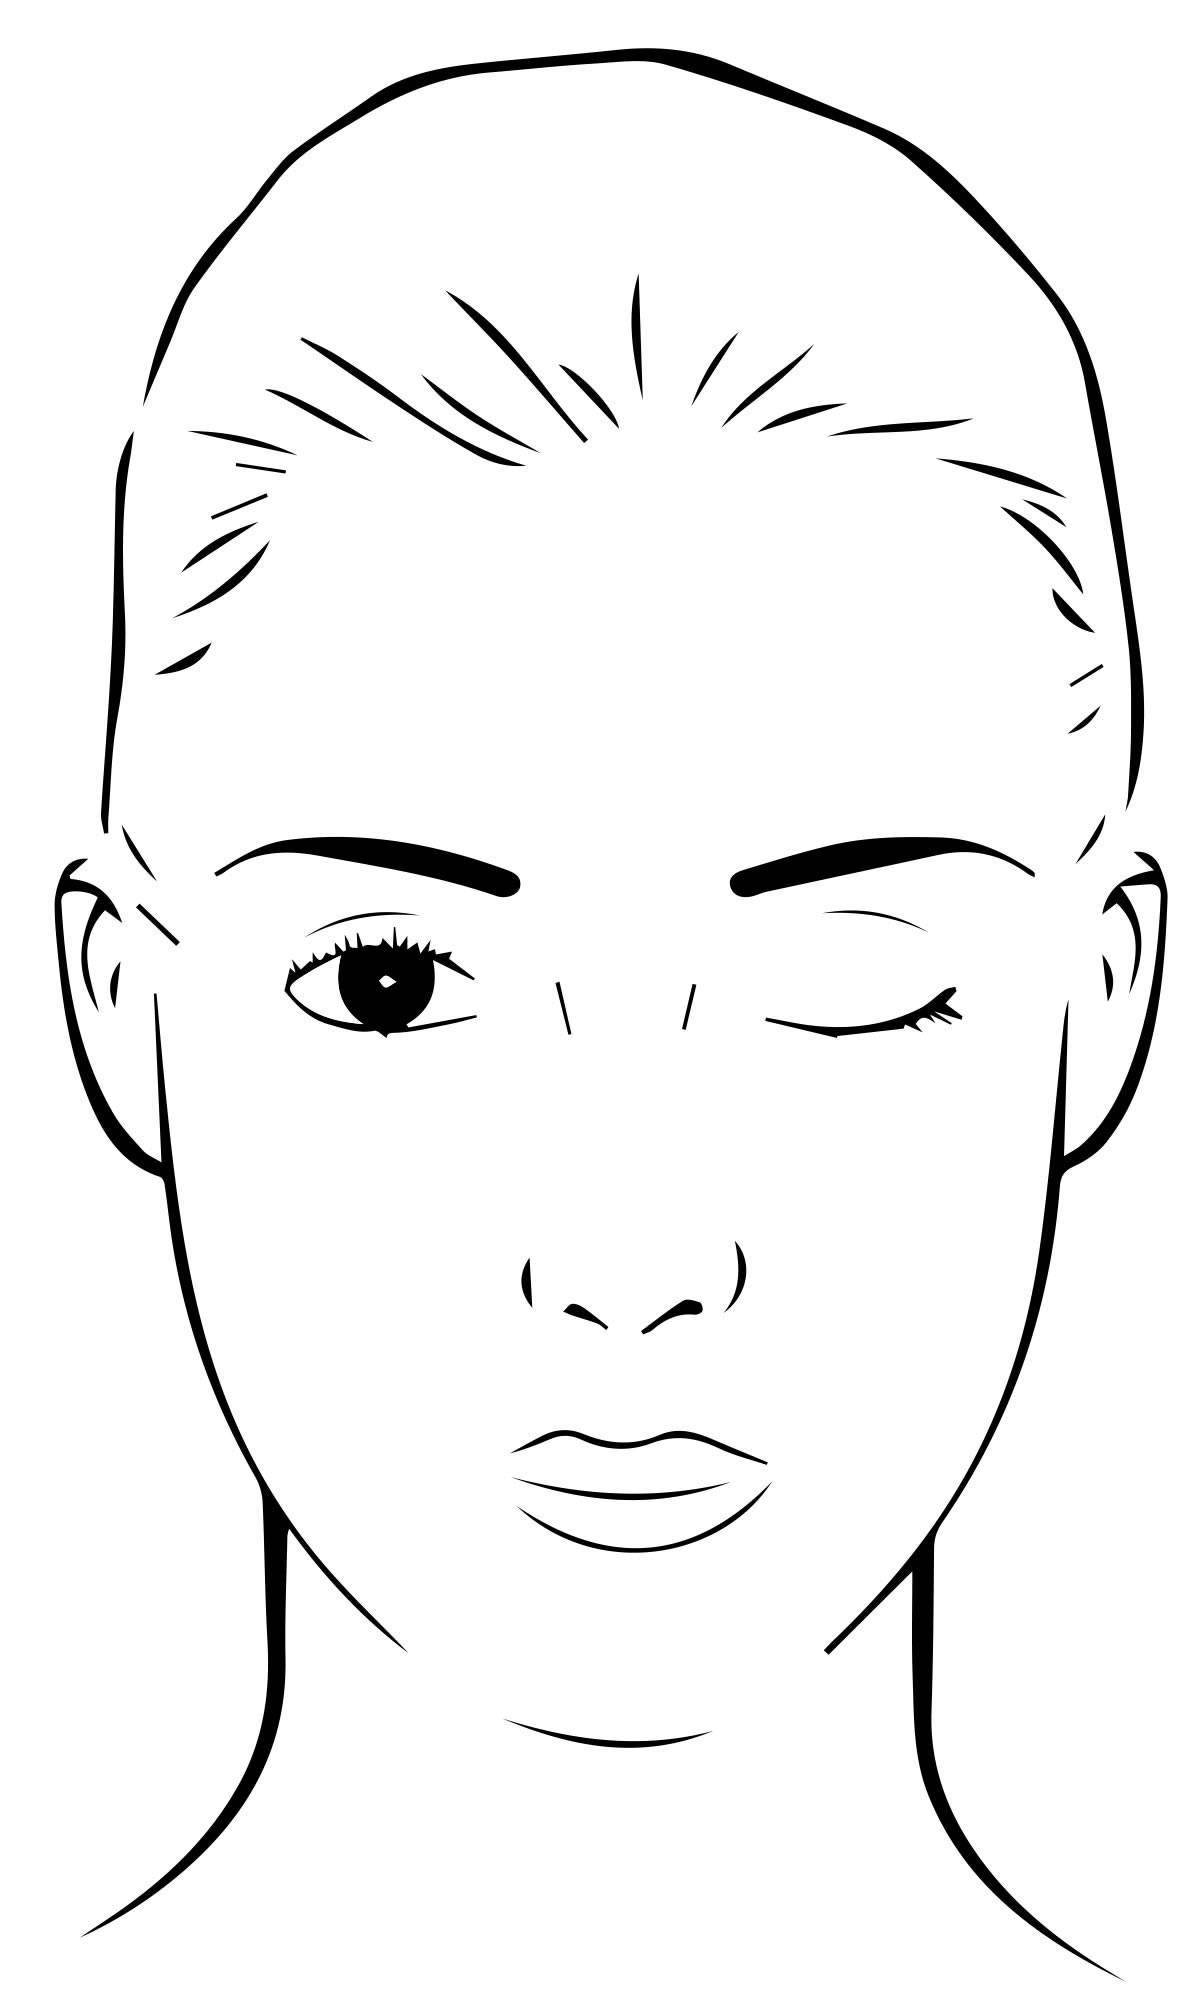 Fascinating woman face coloring page with makeup